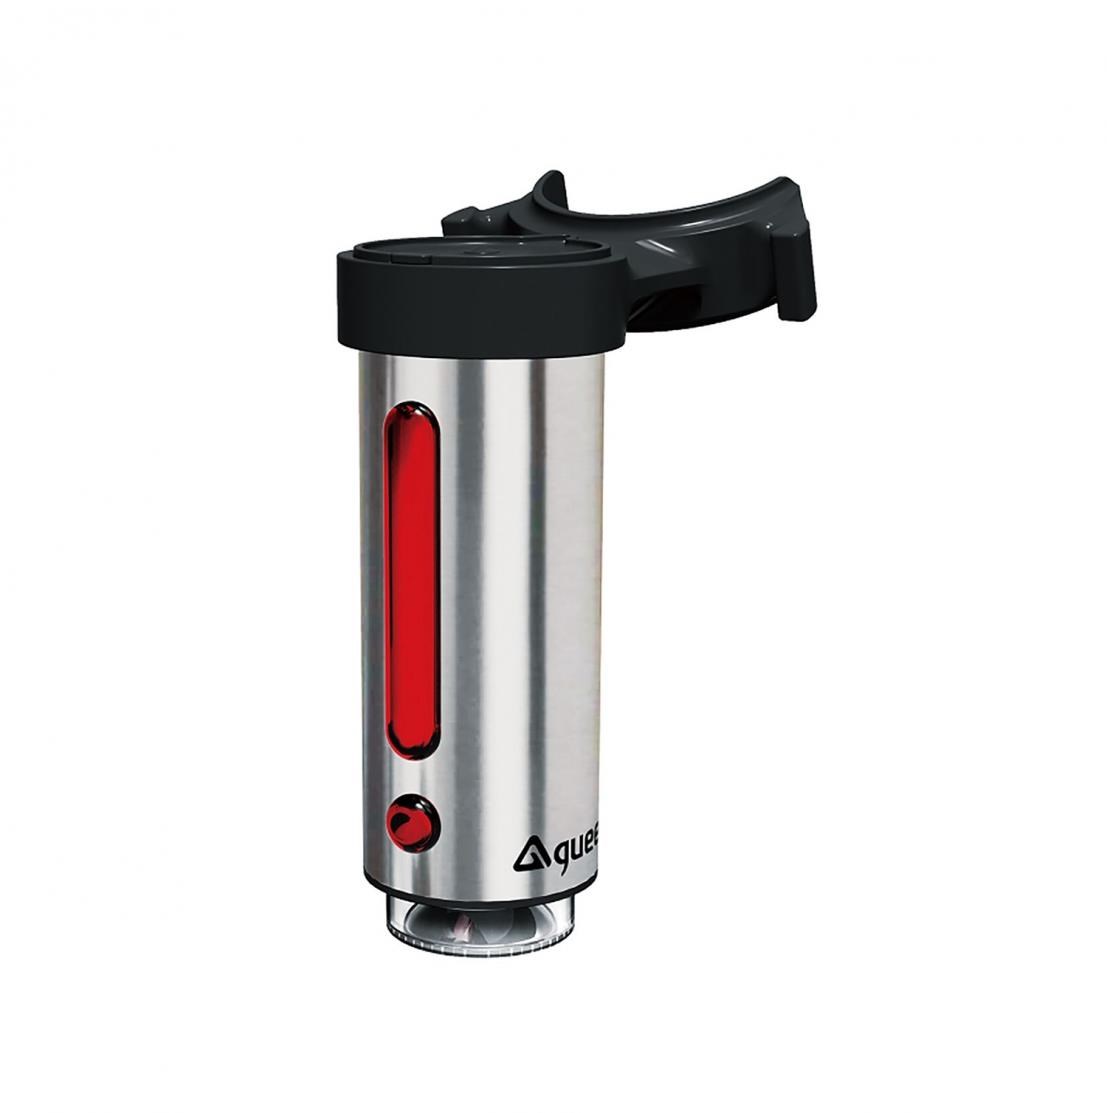 Guee Inox Mini Rechargeable Rear Light product image